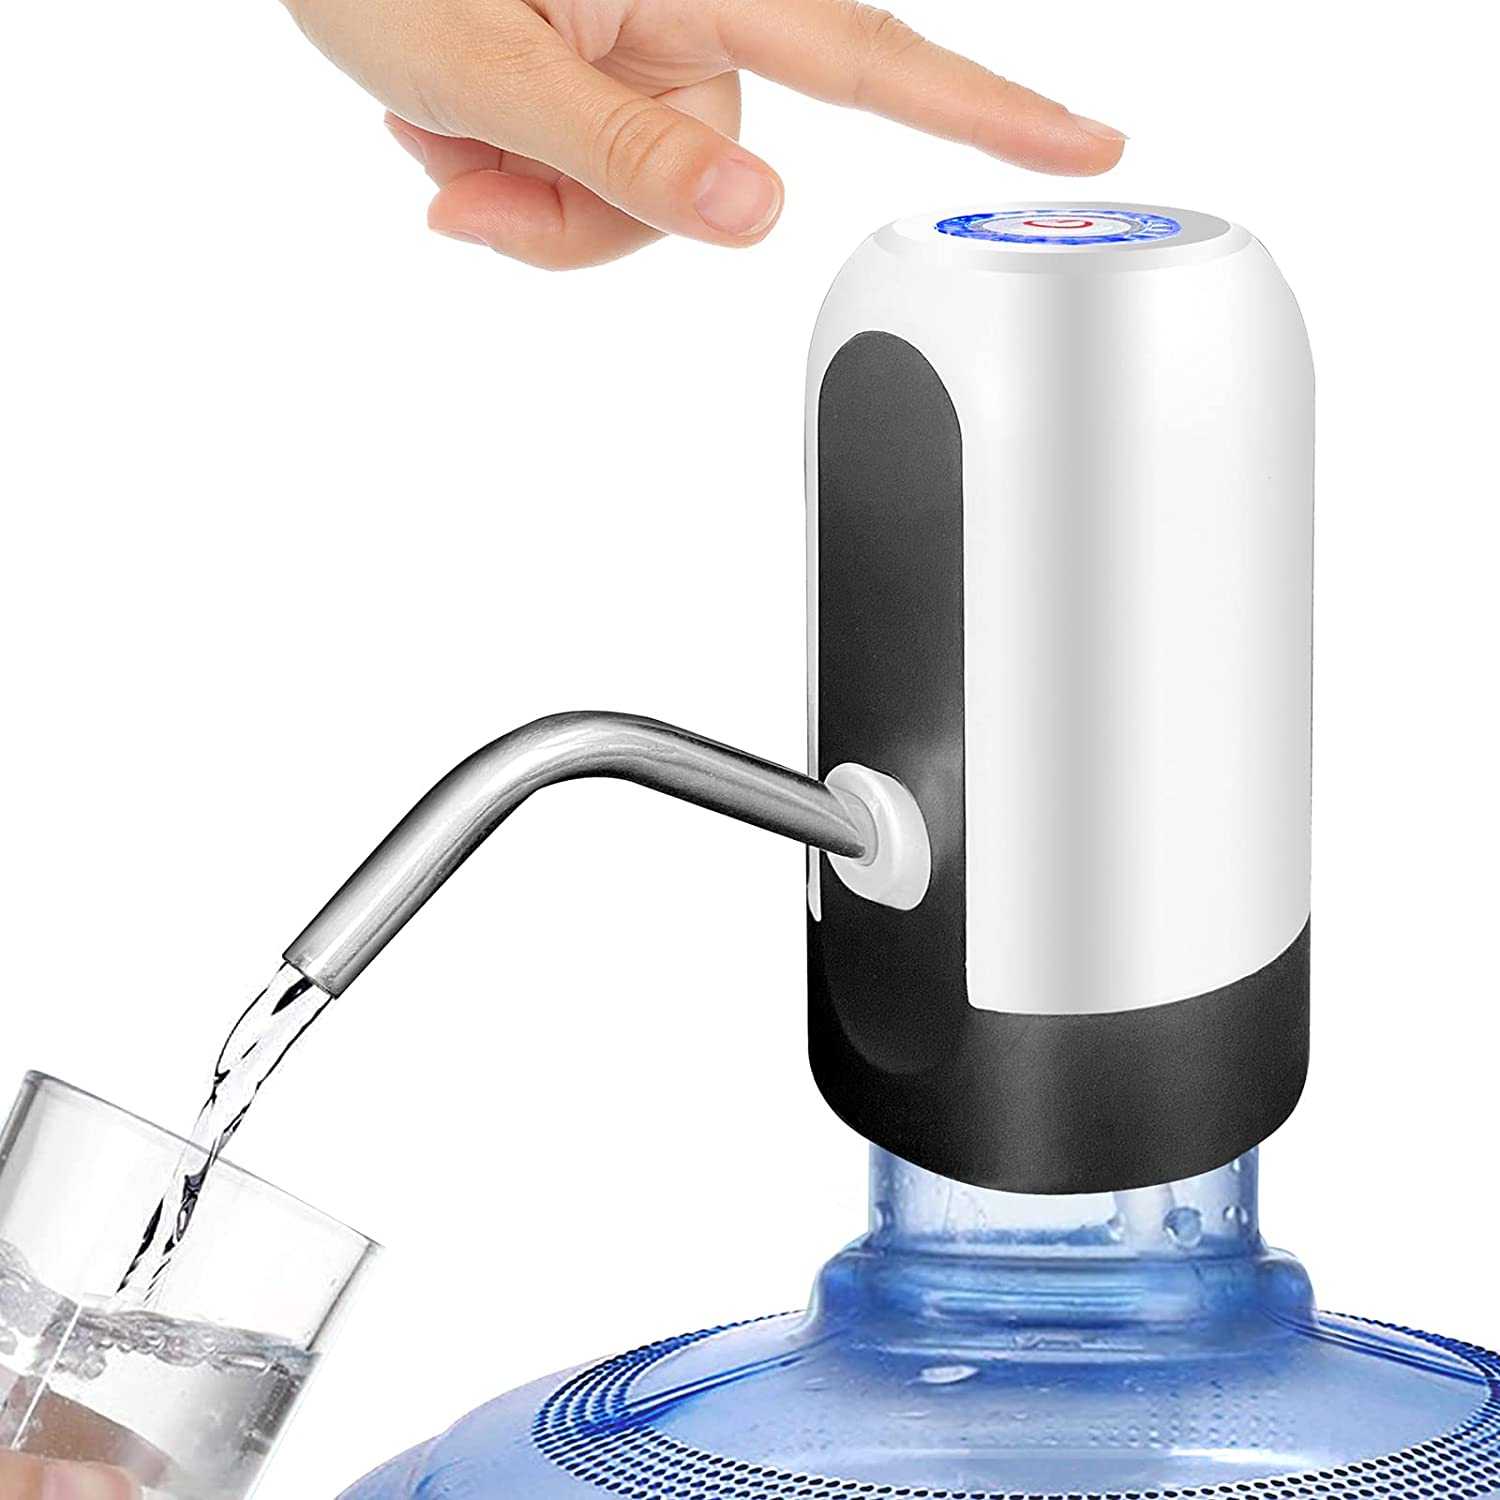 Berge Tackle Scent Dispenser: Buy Online at Best Price in UAE 